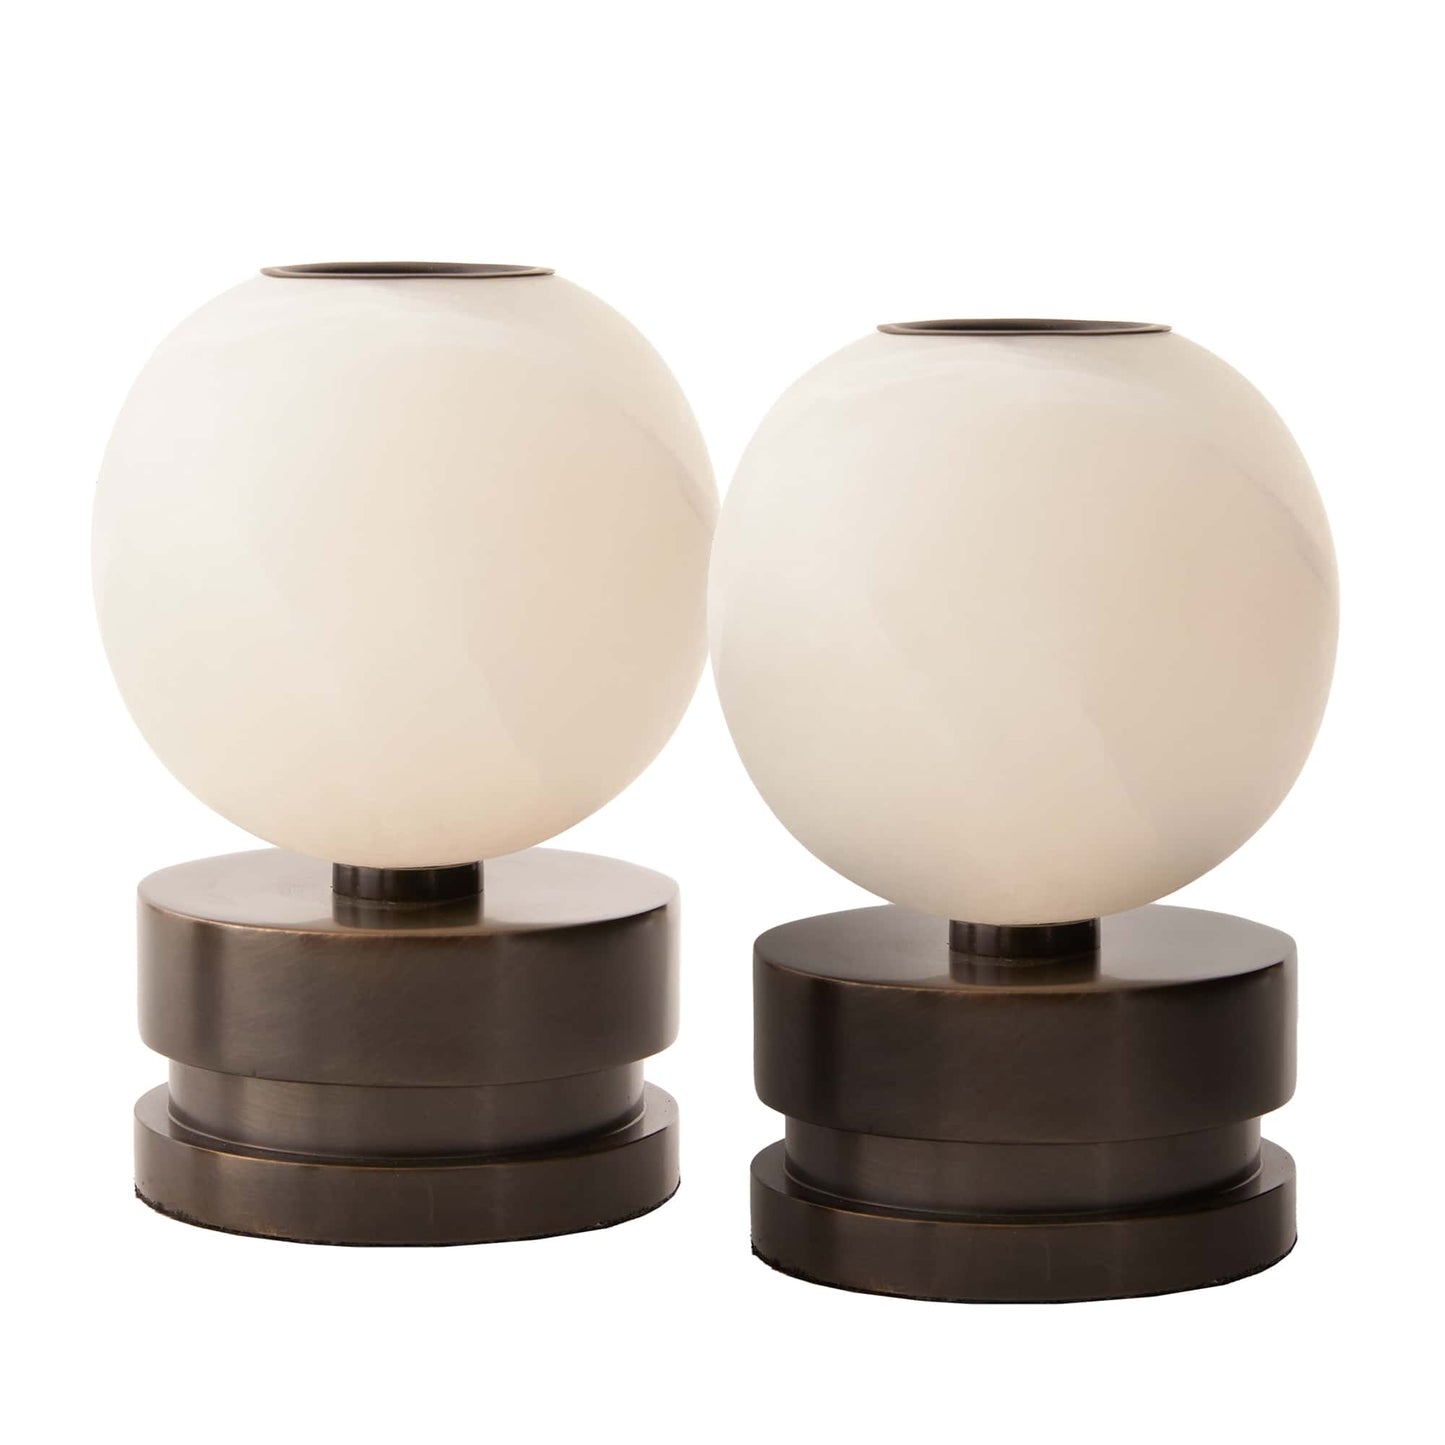 Pluto Candleholders Set of 2 - Modern Chic Candle Holders - Indoor Décor Essentials